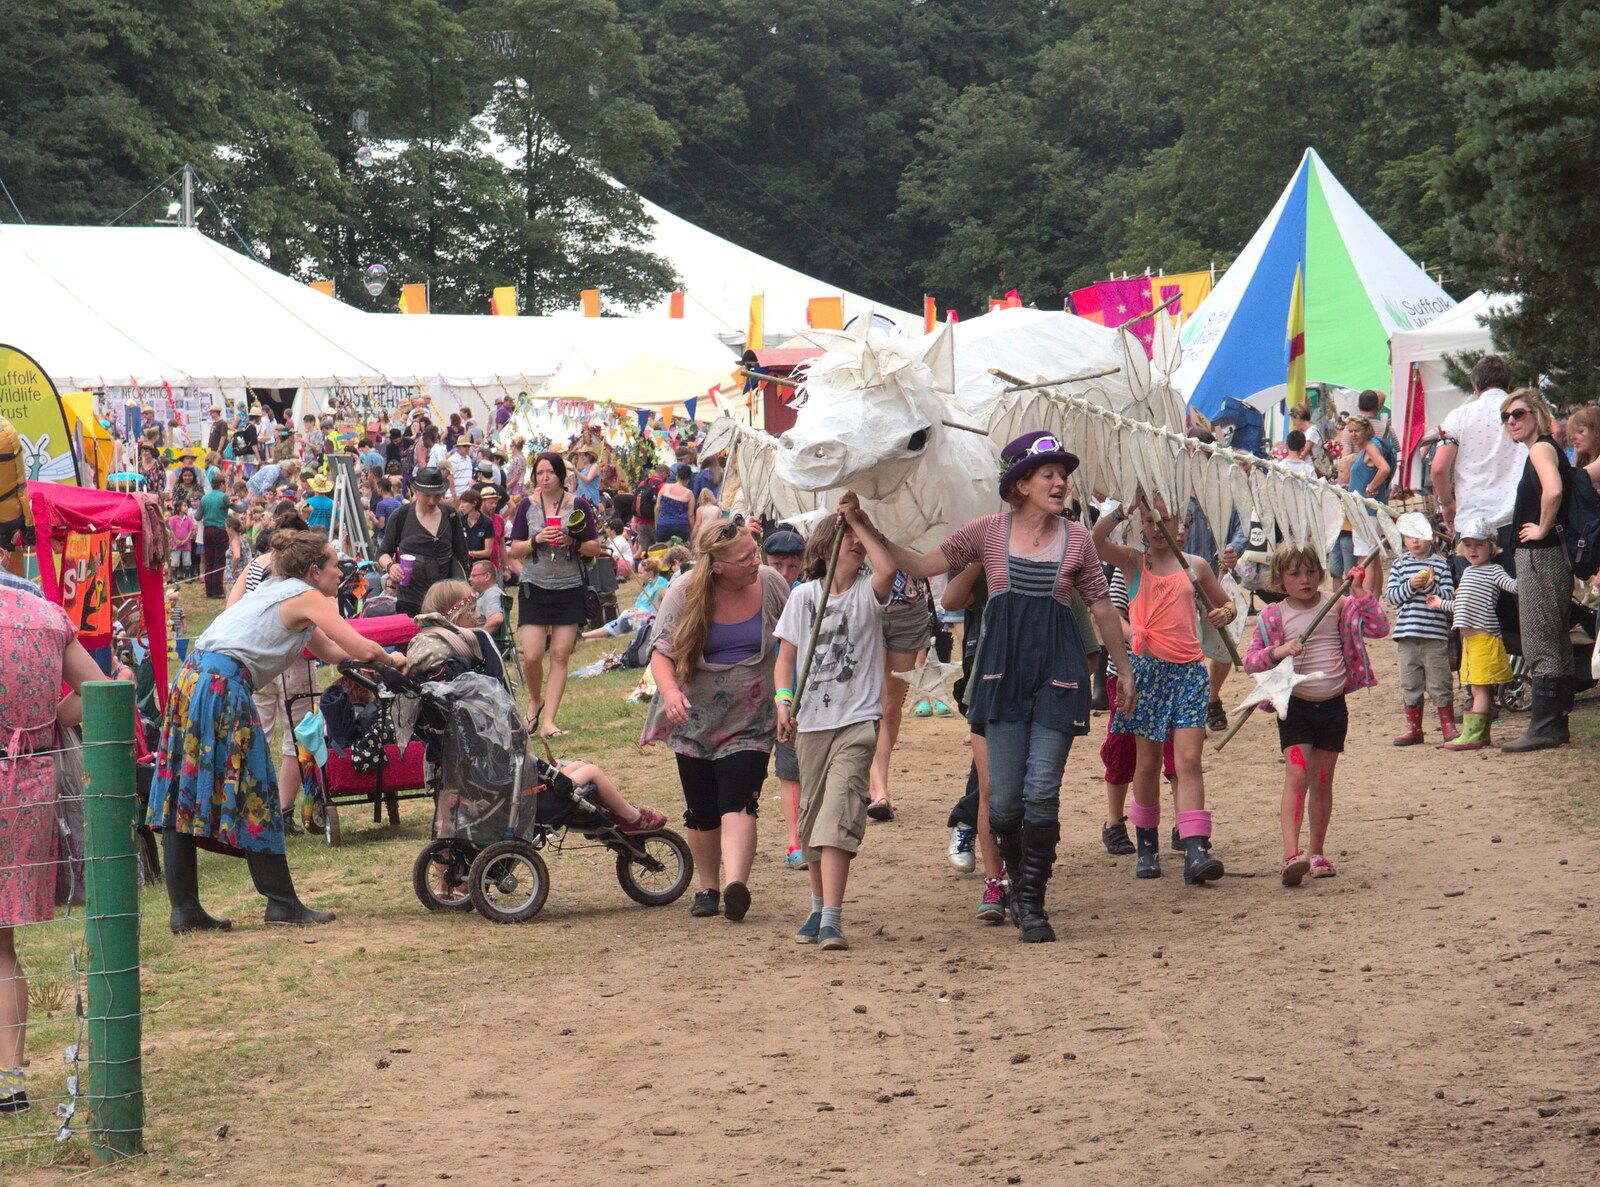 A big winged thing is hauled around from Latitude Festival, Henham Park, Southwold, Suffolk - 17th July 2014